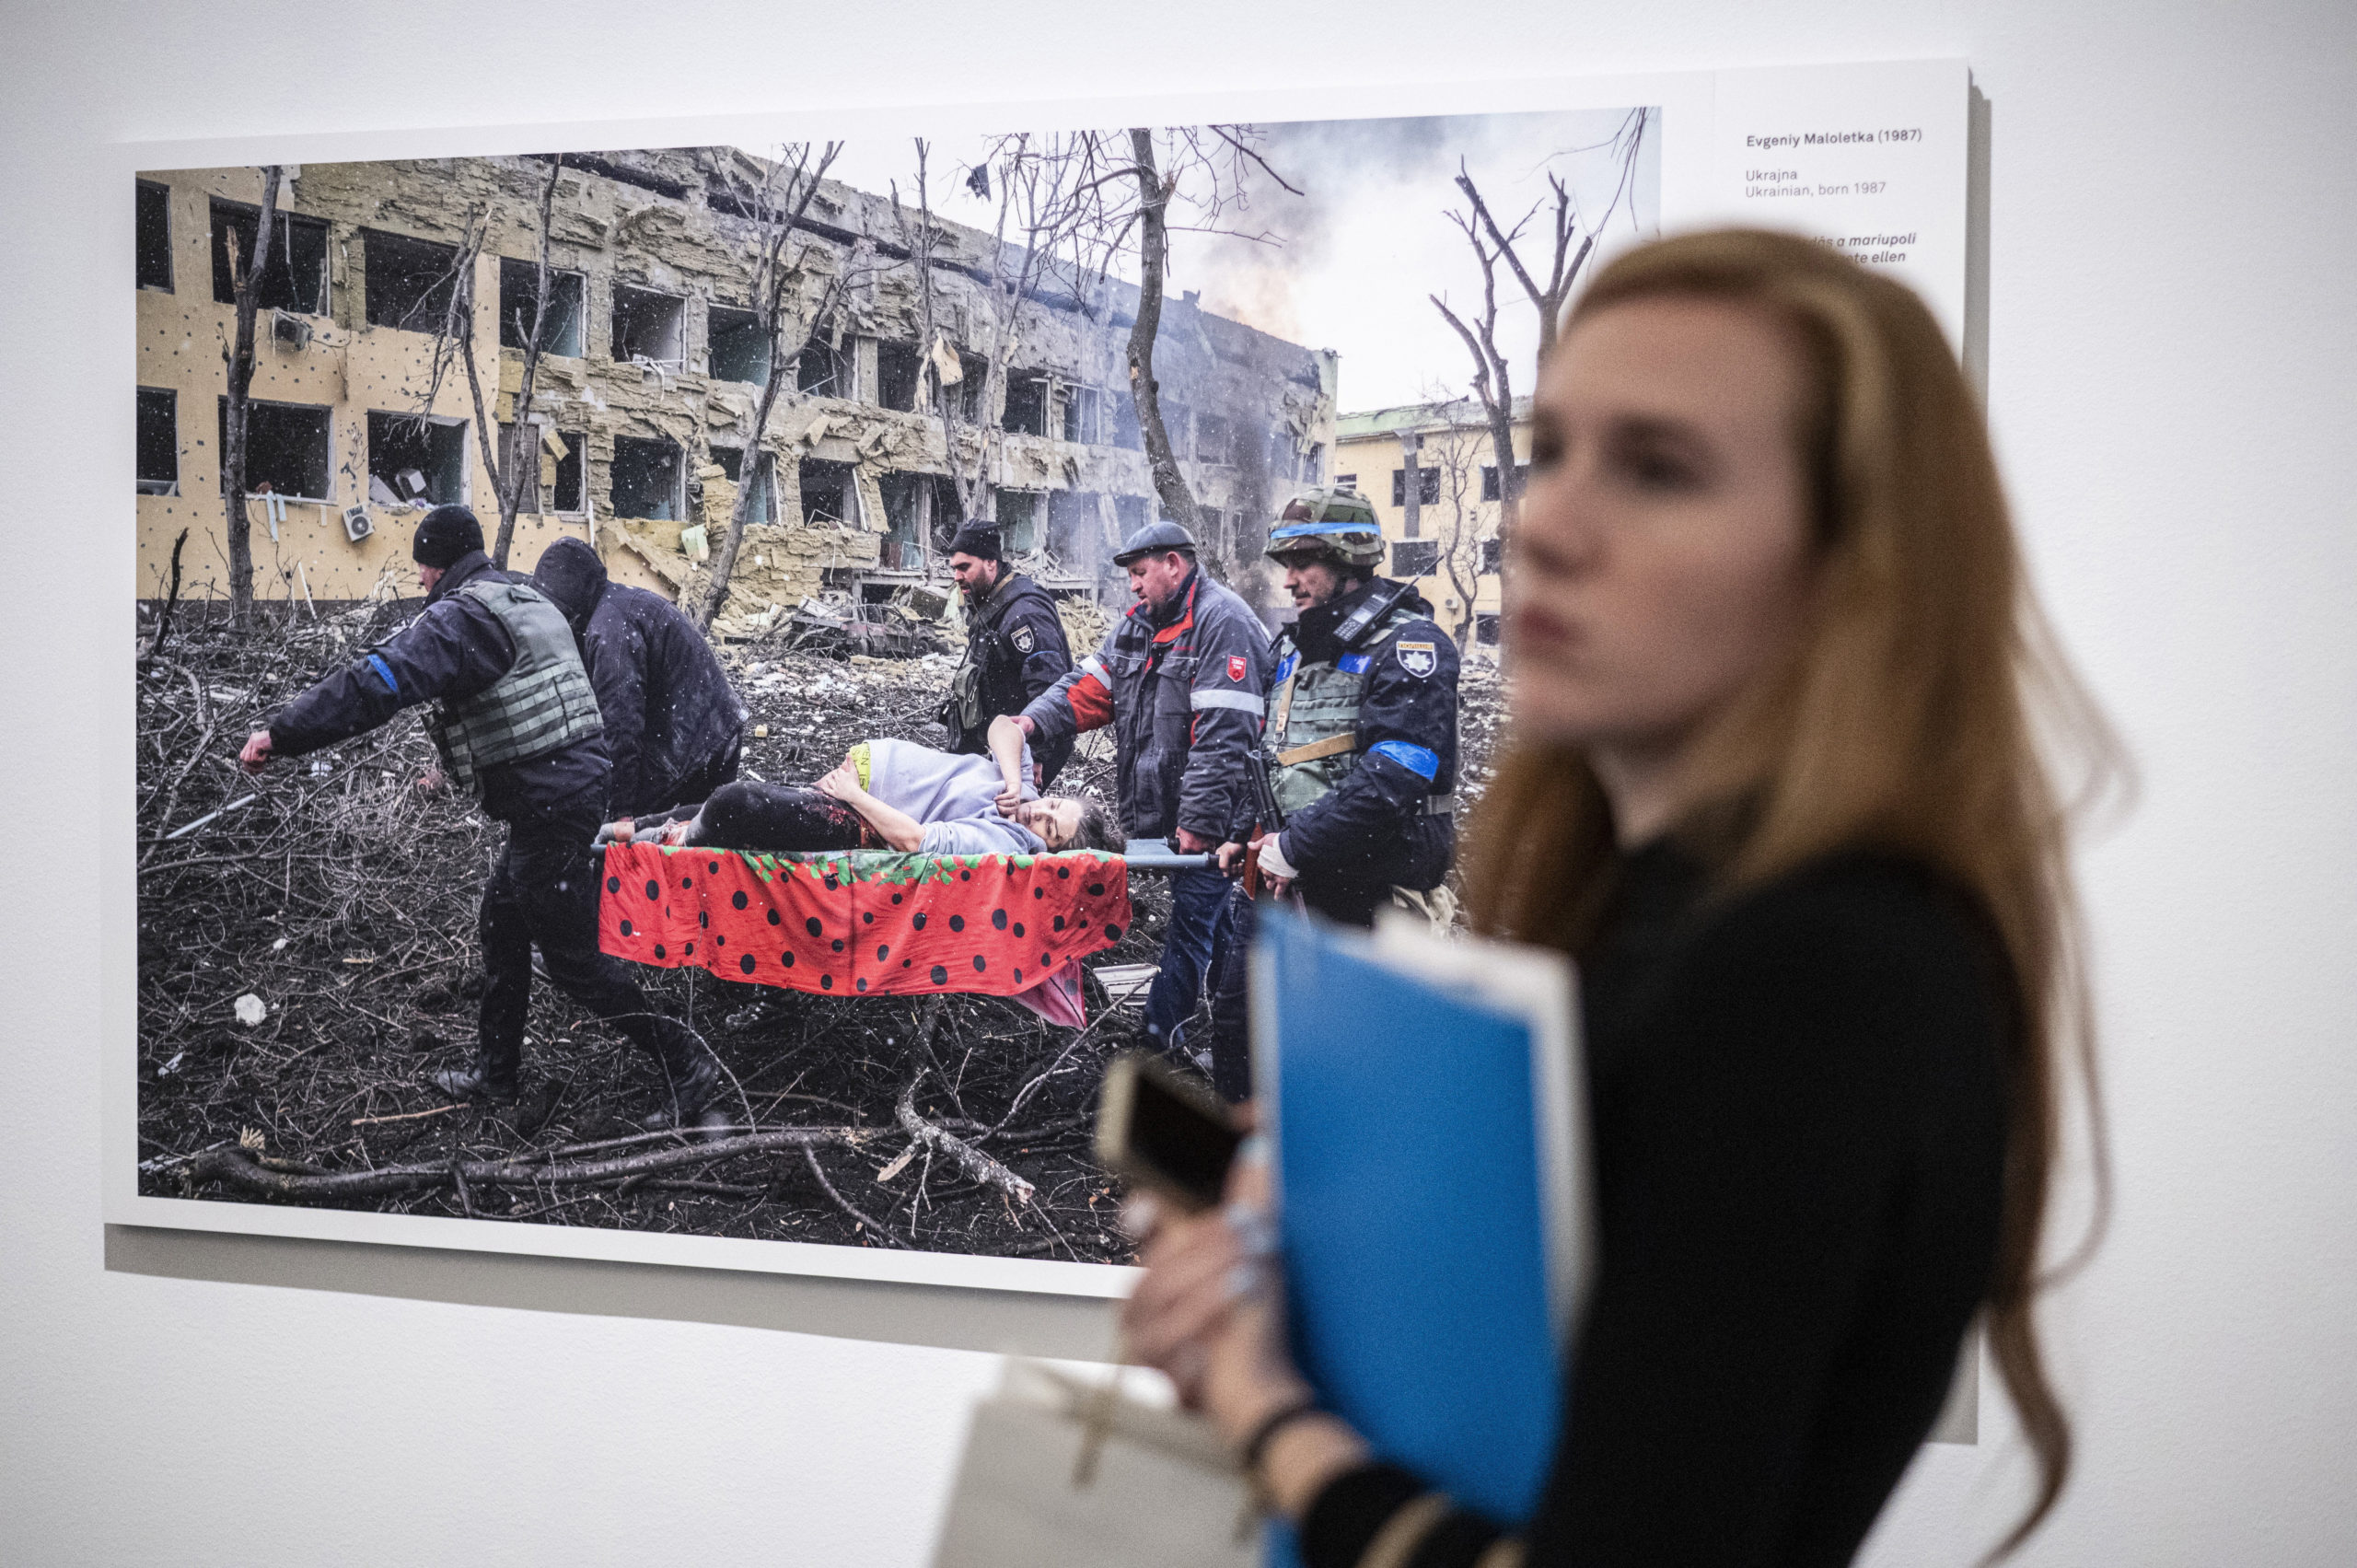 Photograph titled "Mariupol Maternity Hospital Aistrike" is on display at the opening of the World Press Photo 2023 exhibition at the Hungarian National Museum in Budapest, Hungary, on Sept. 21. The director of the Hungarian National Museum was fired for displaying LGBT content that violated the 2021 "child protection" law.